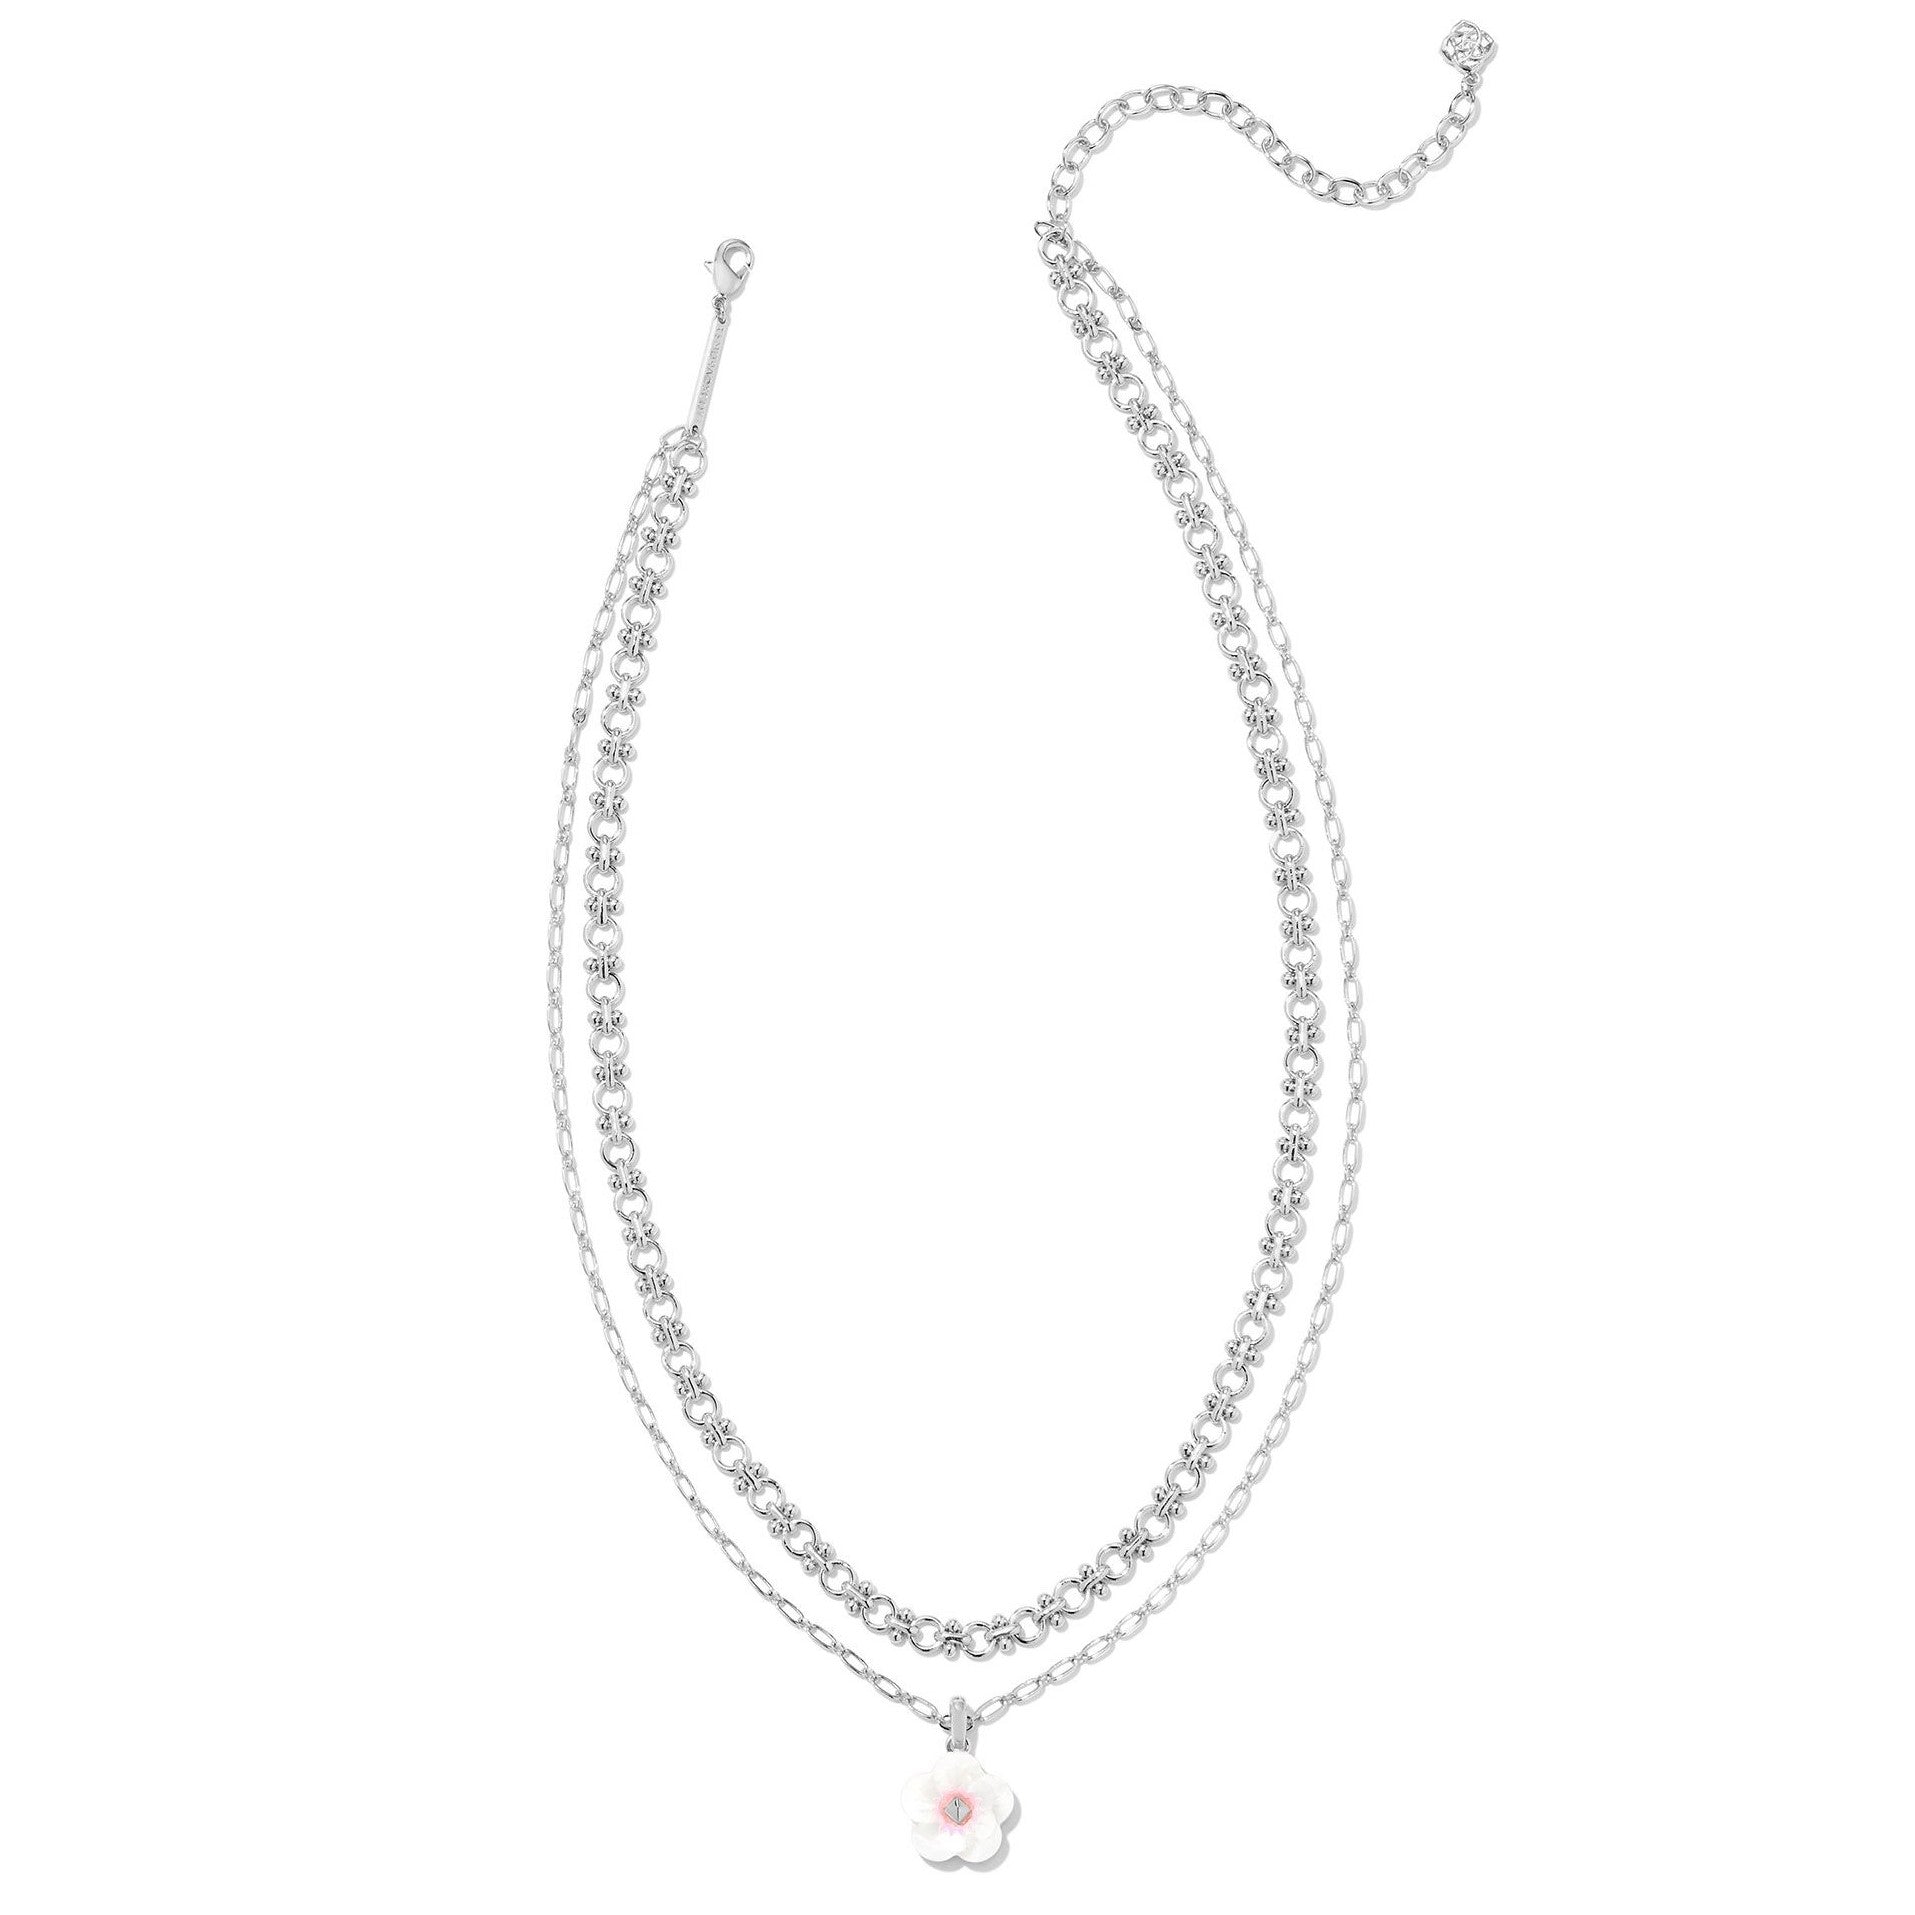 Kendra Scott | Deliah Silver Multi Strand Necklace in Iridescent Pink and White Mix - Giddy Up Glamour Boutique